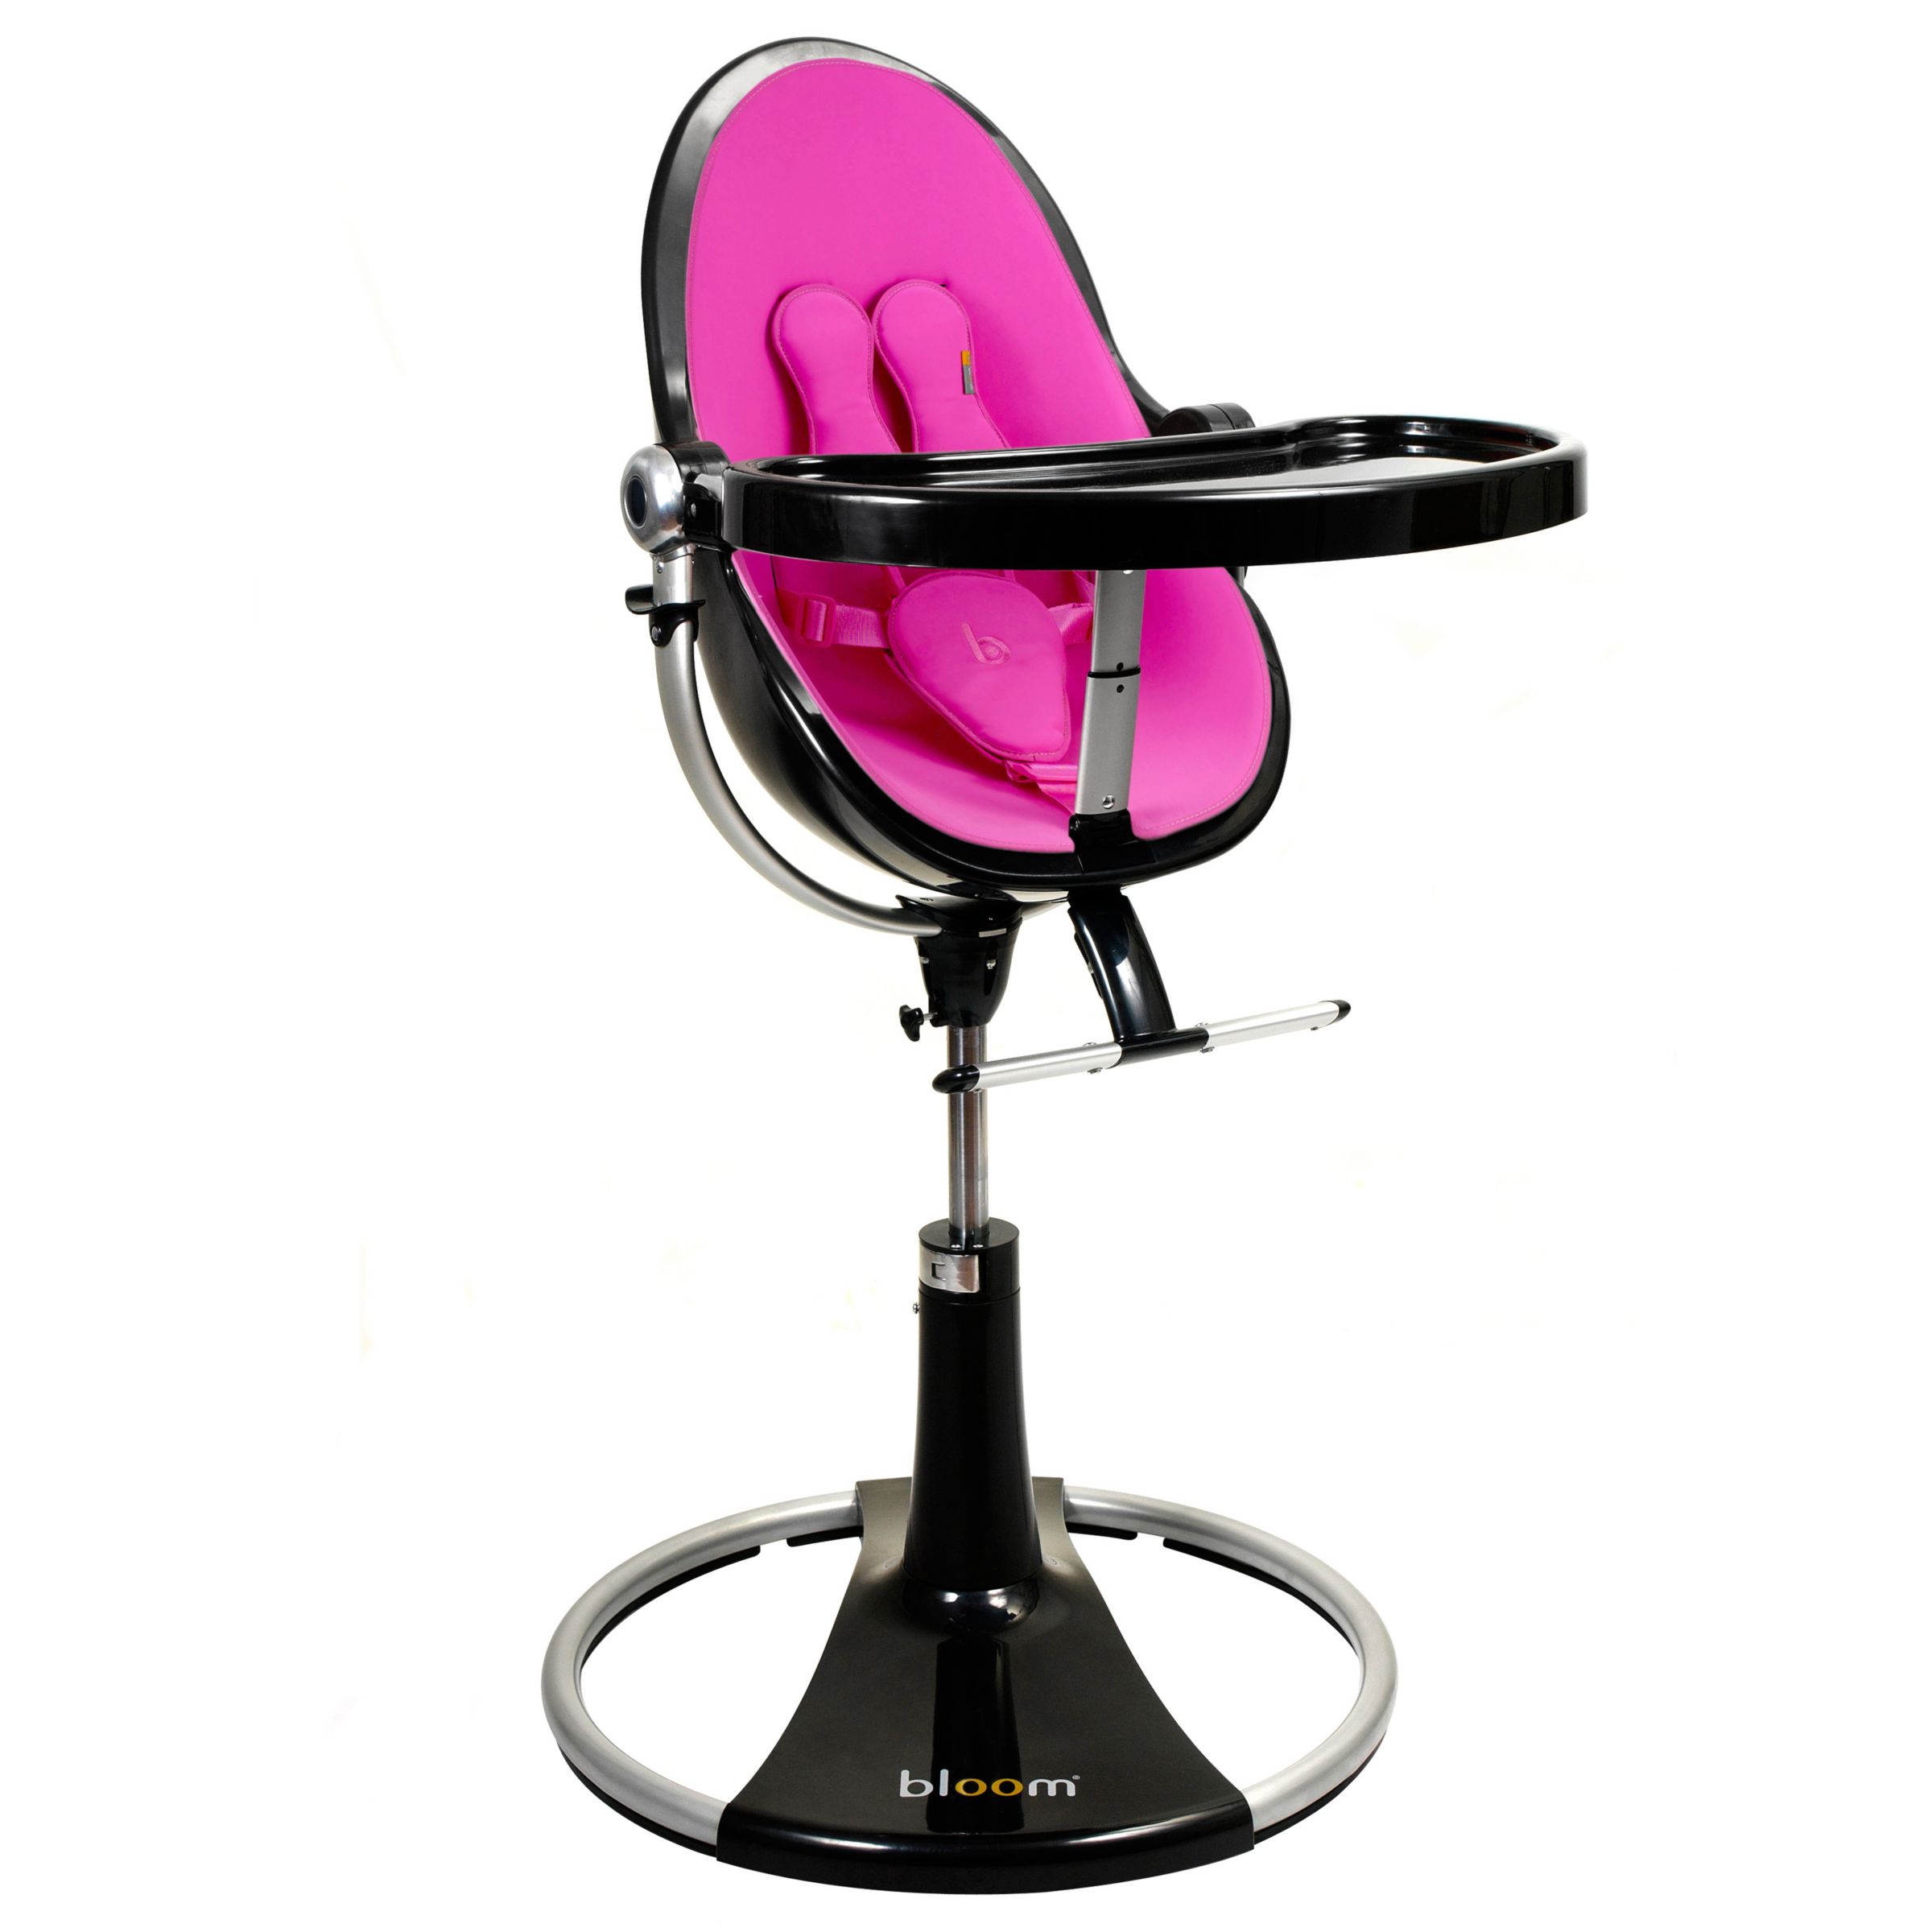 bloom Fresco Loft Contemporary Leatherette Baby Chair, Ebony Black with Rosy Pink at John Lewis